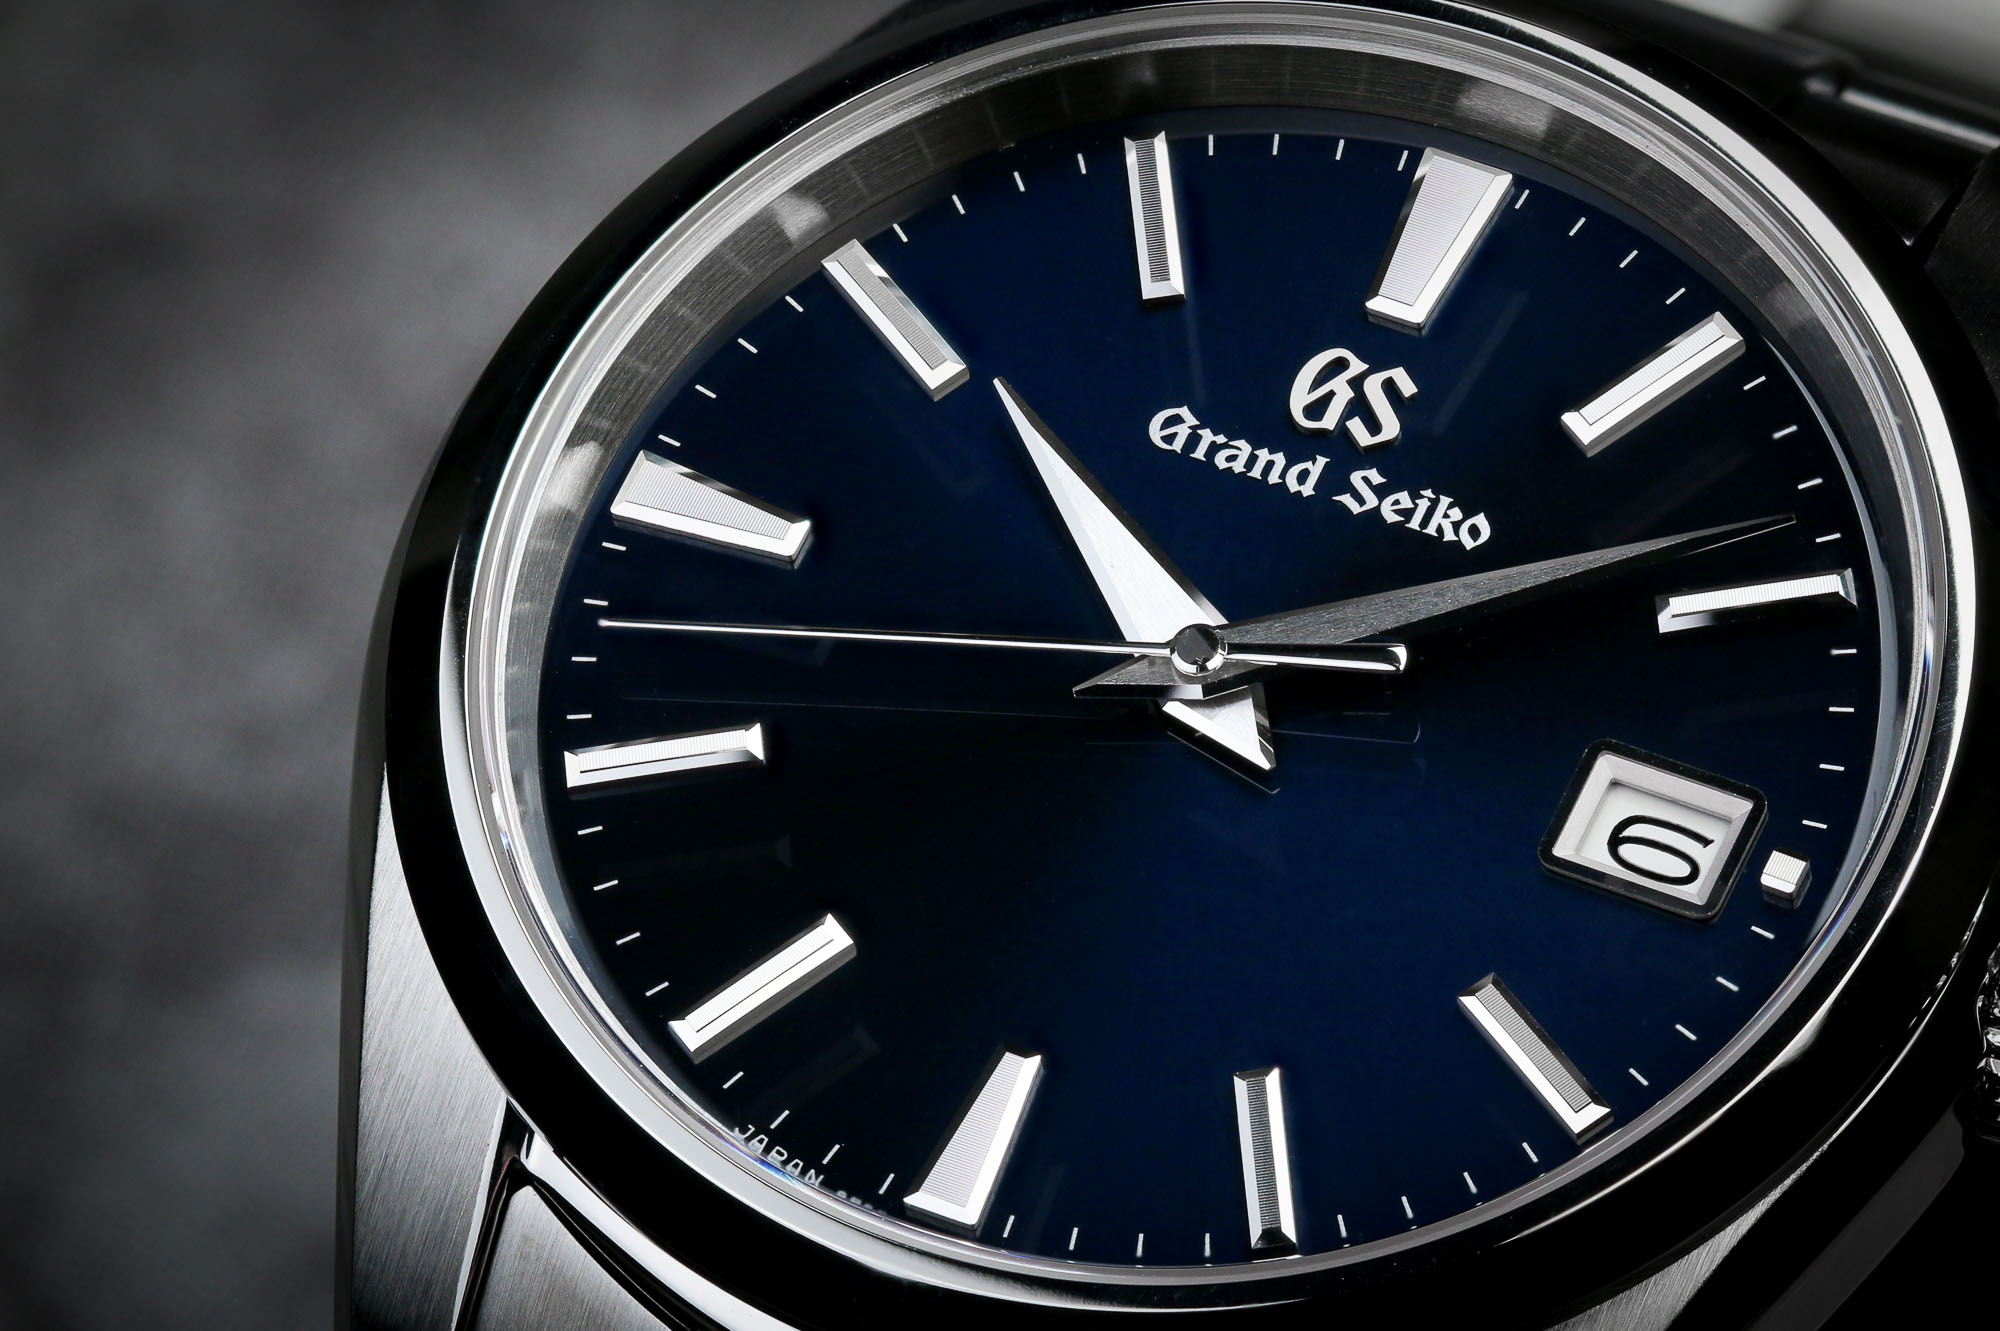 Grand Seiko SBGP013 stainless steel wristwatch with blue dial.